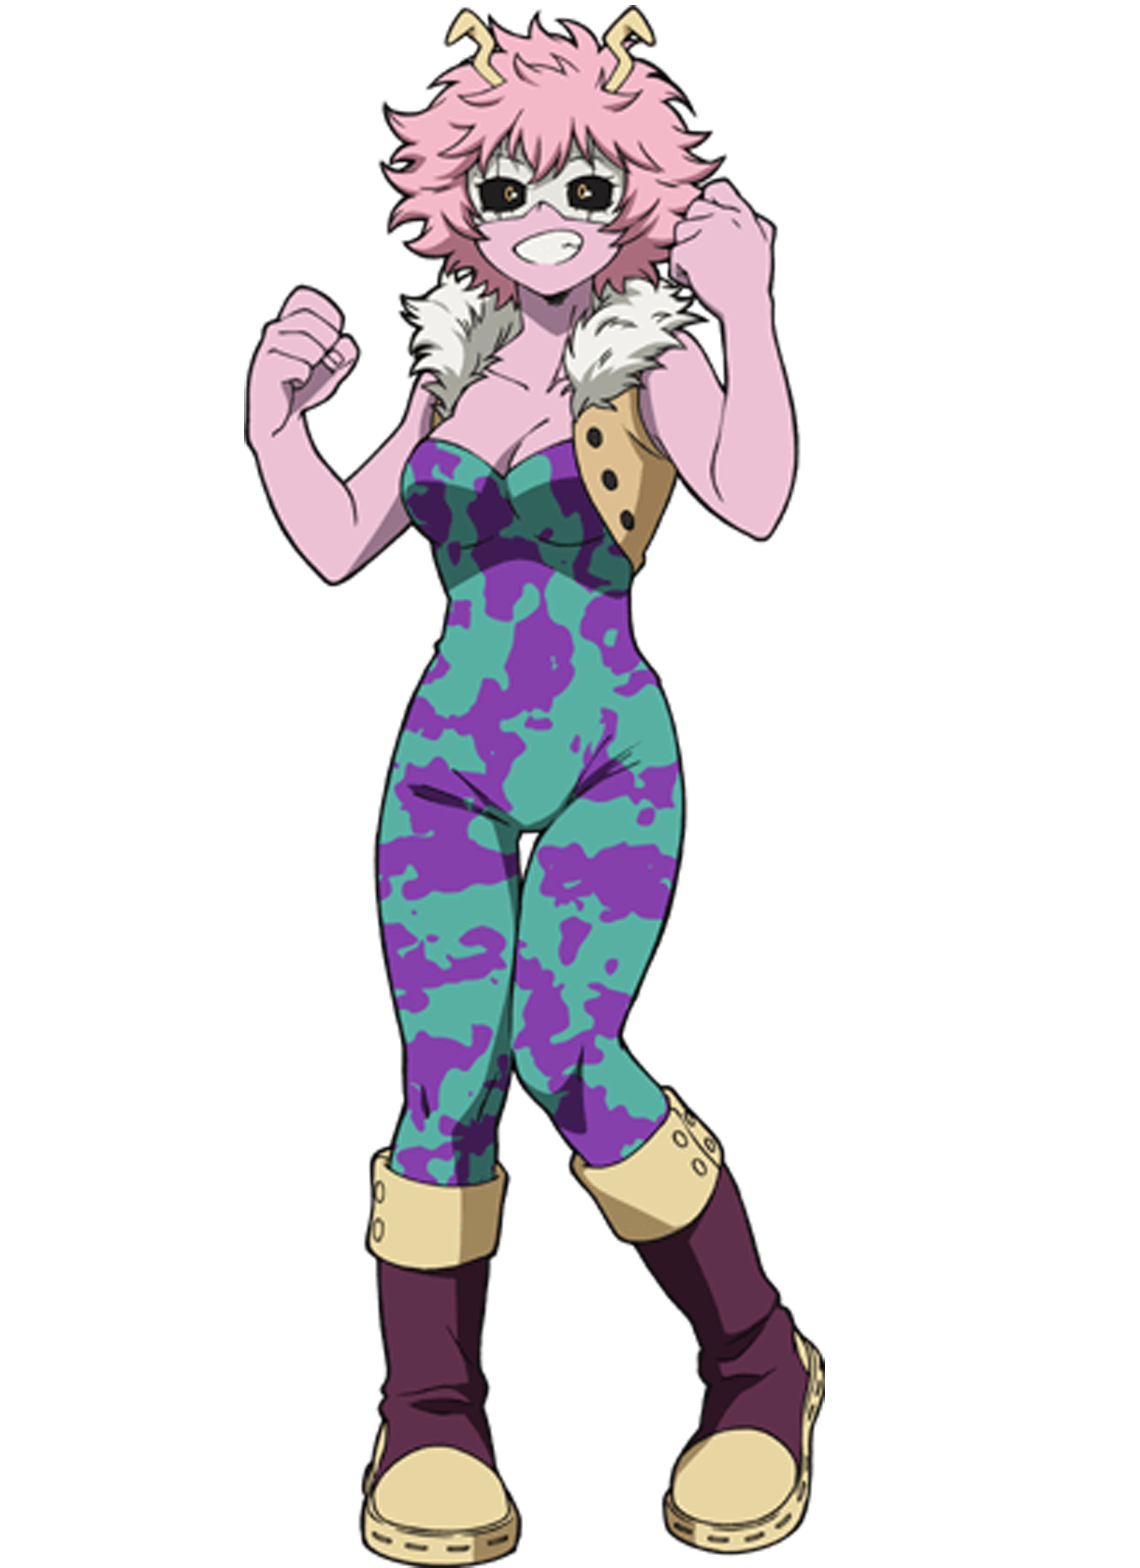 𝓅𝓇𝑒𝓉𝓉𝓎 𝒷𝑜𝓎 | Mina redesign! I've been seeing some bnha...